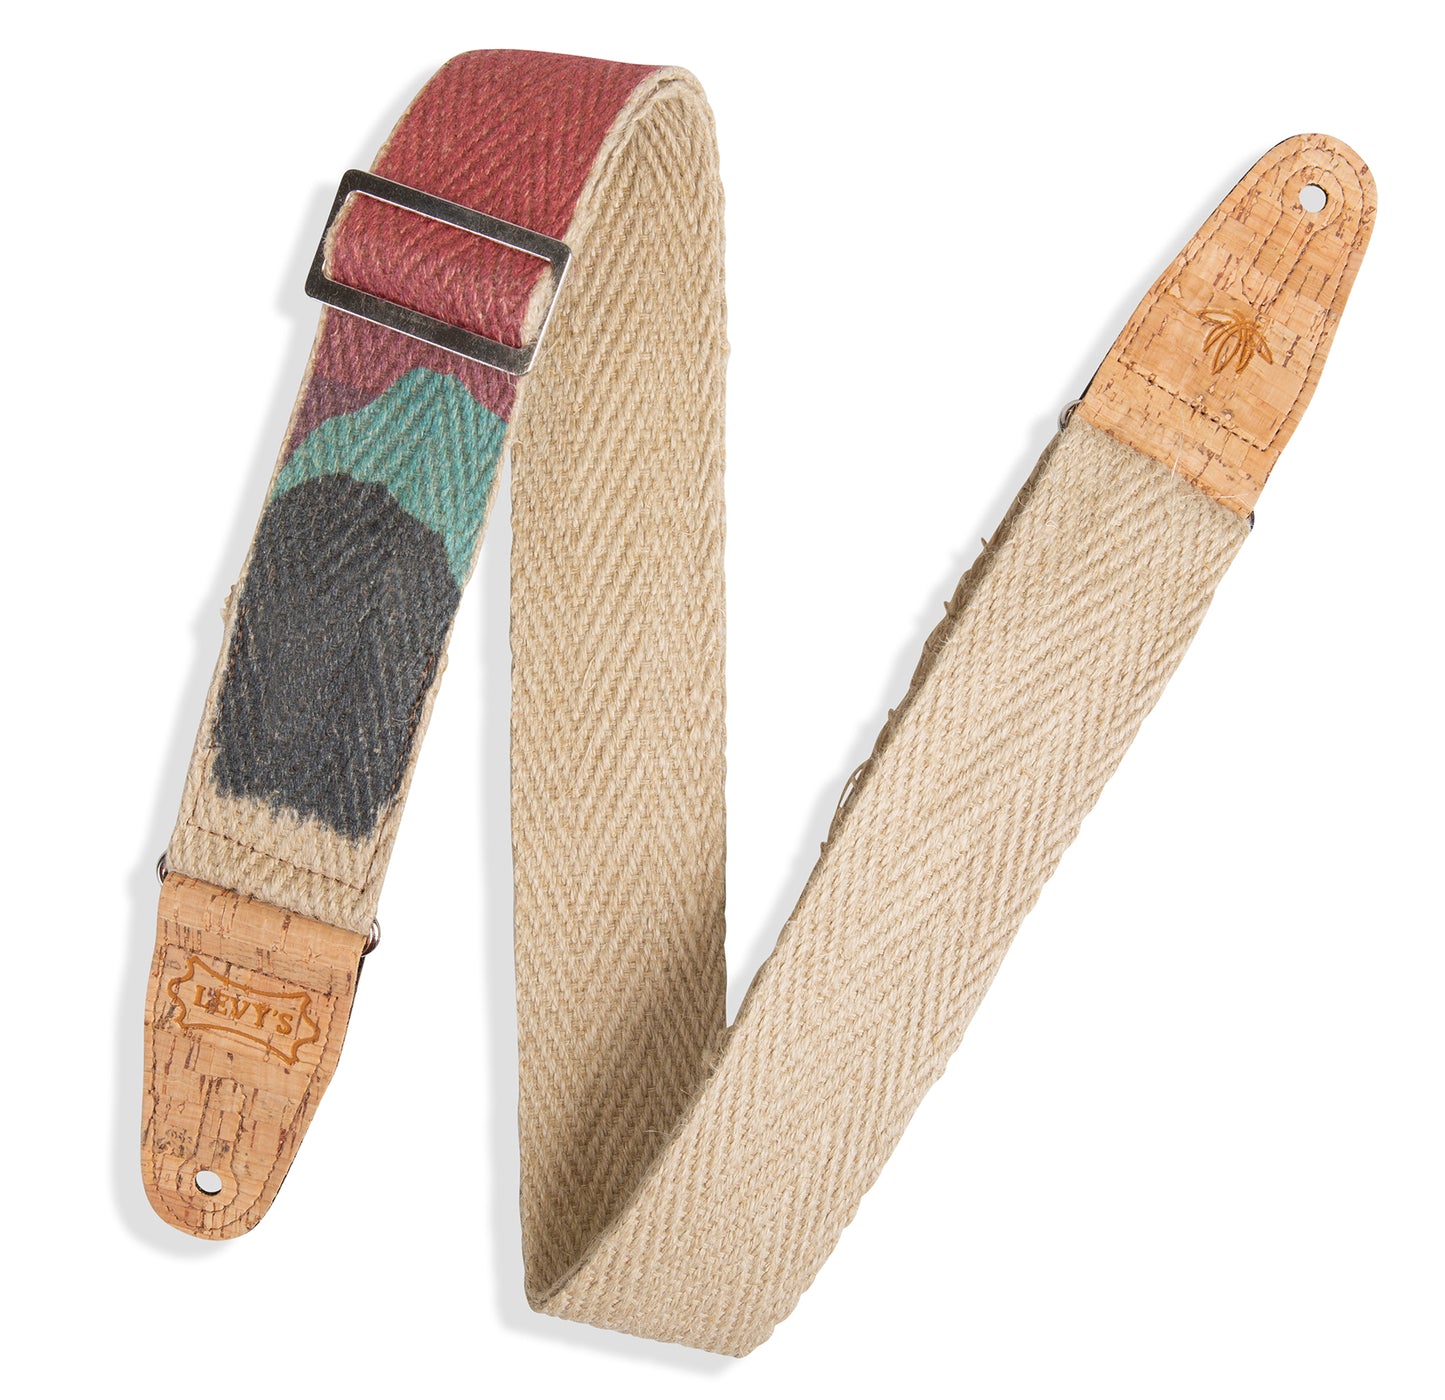 Levy's Leathers - MH8P-003 - 2 inch Wide Hemp Guitar Strap.